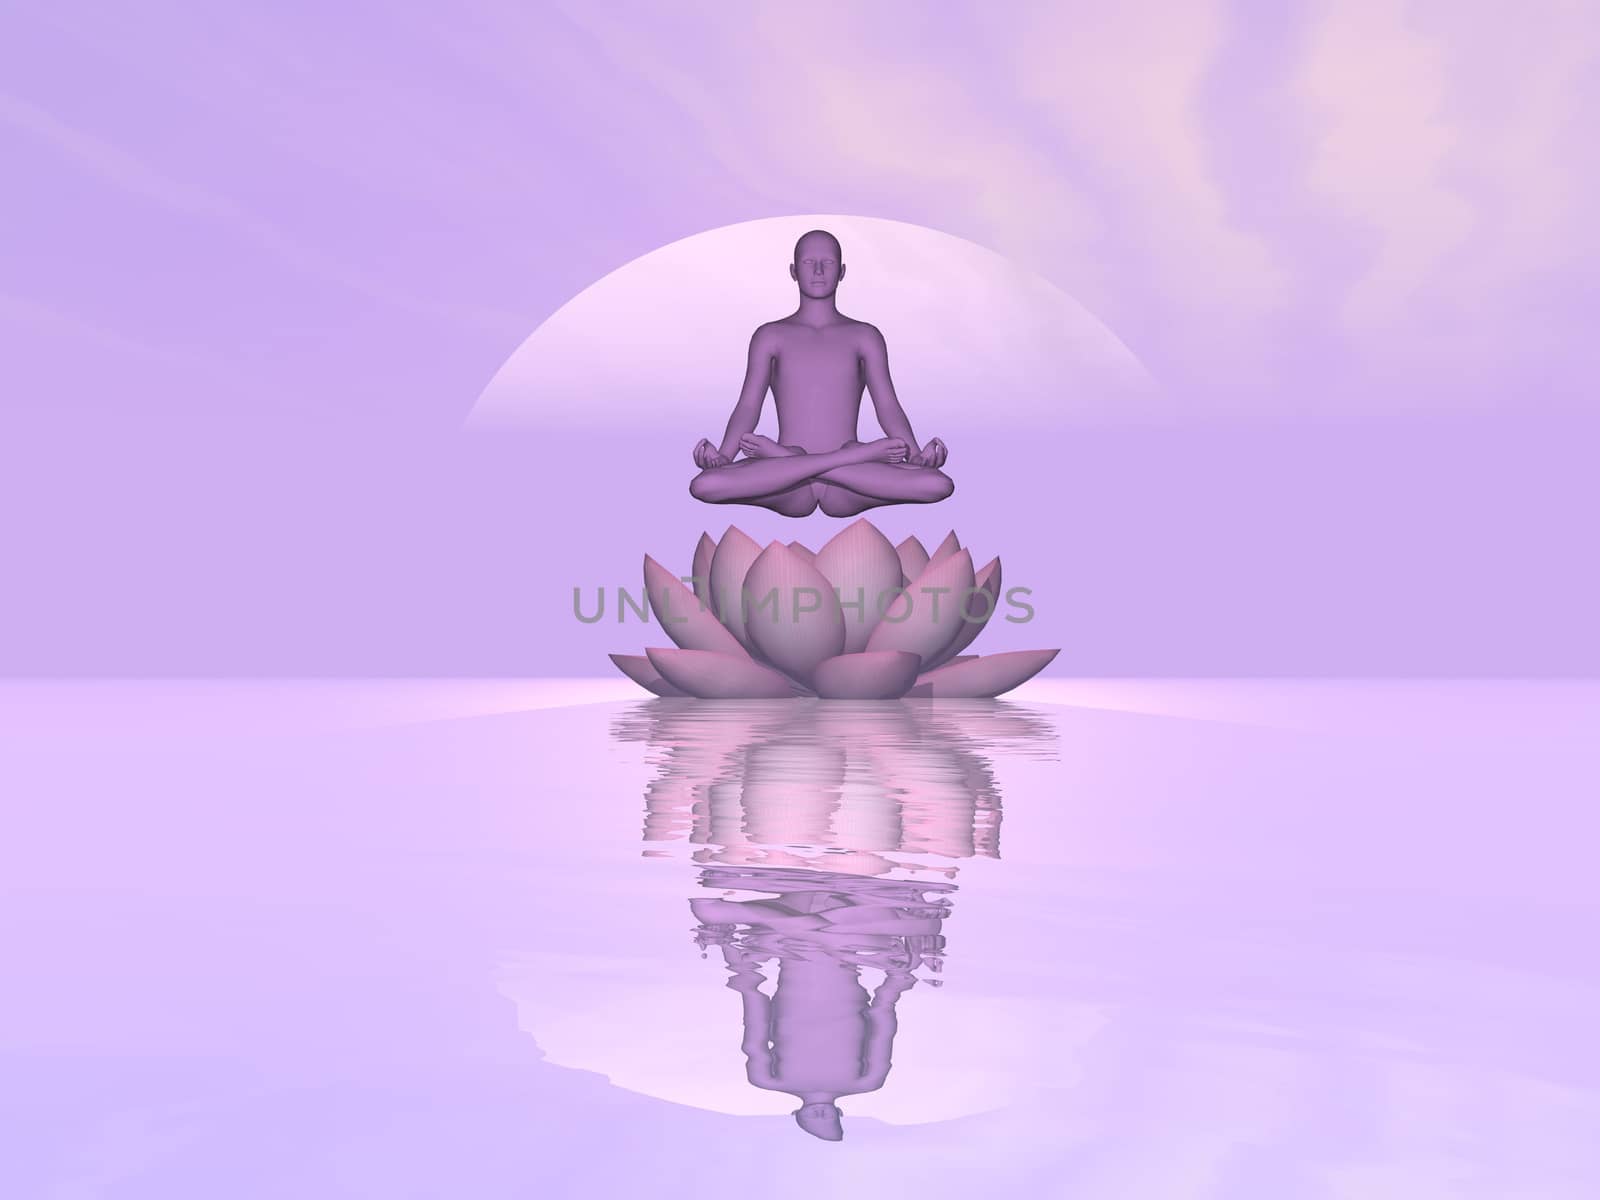 Meditation upon lily lotus flower - 3D render by Elenaphotos21